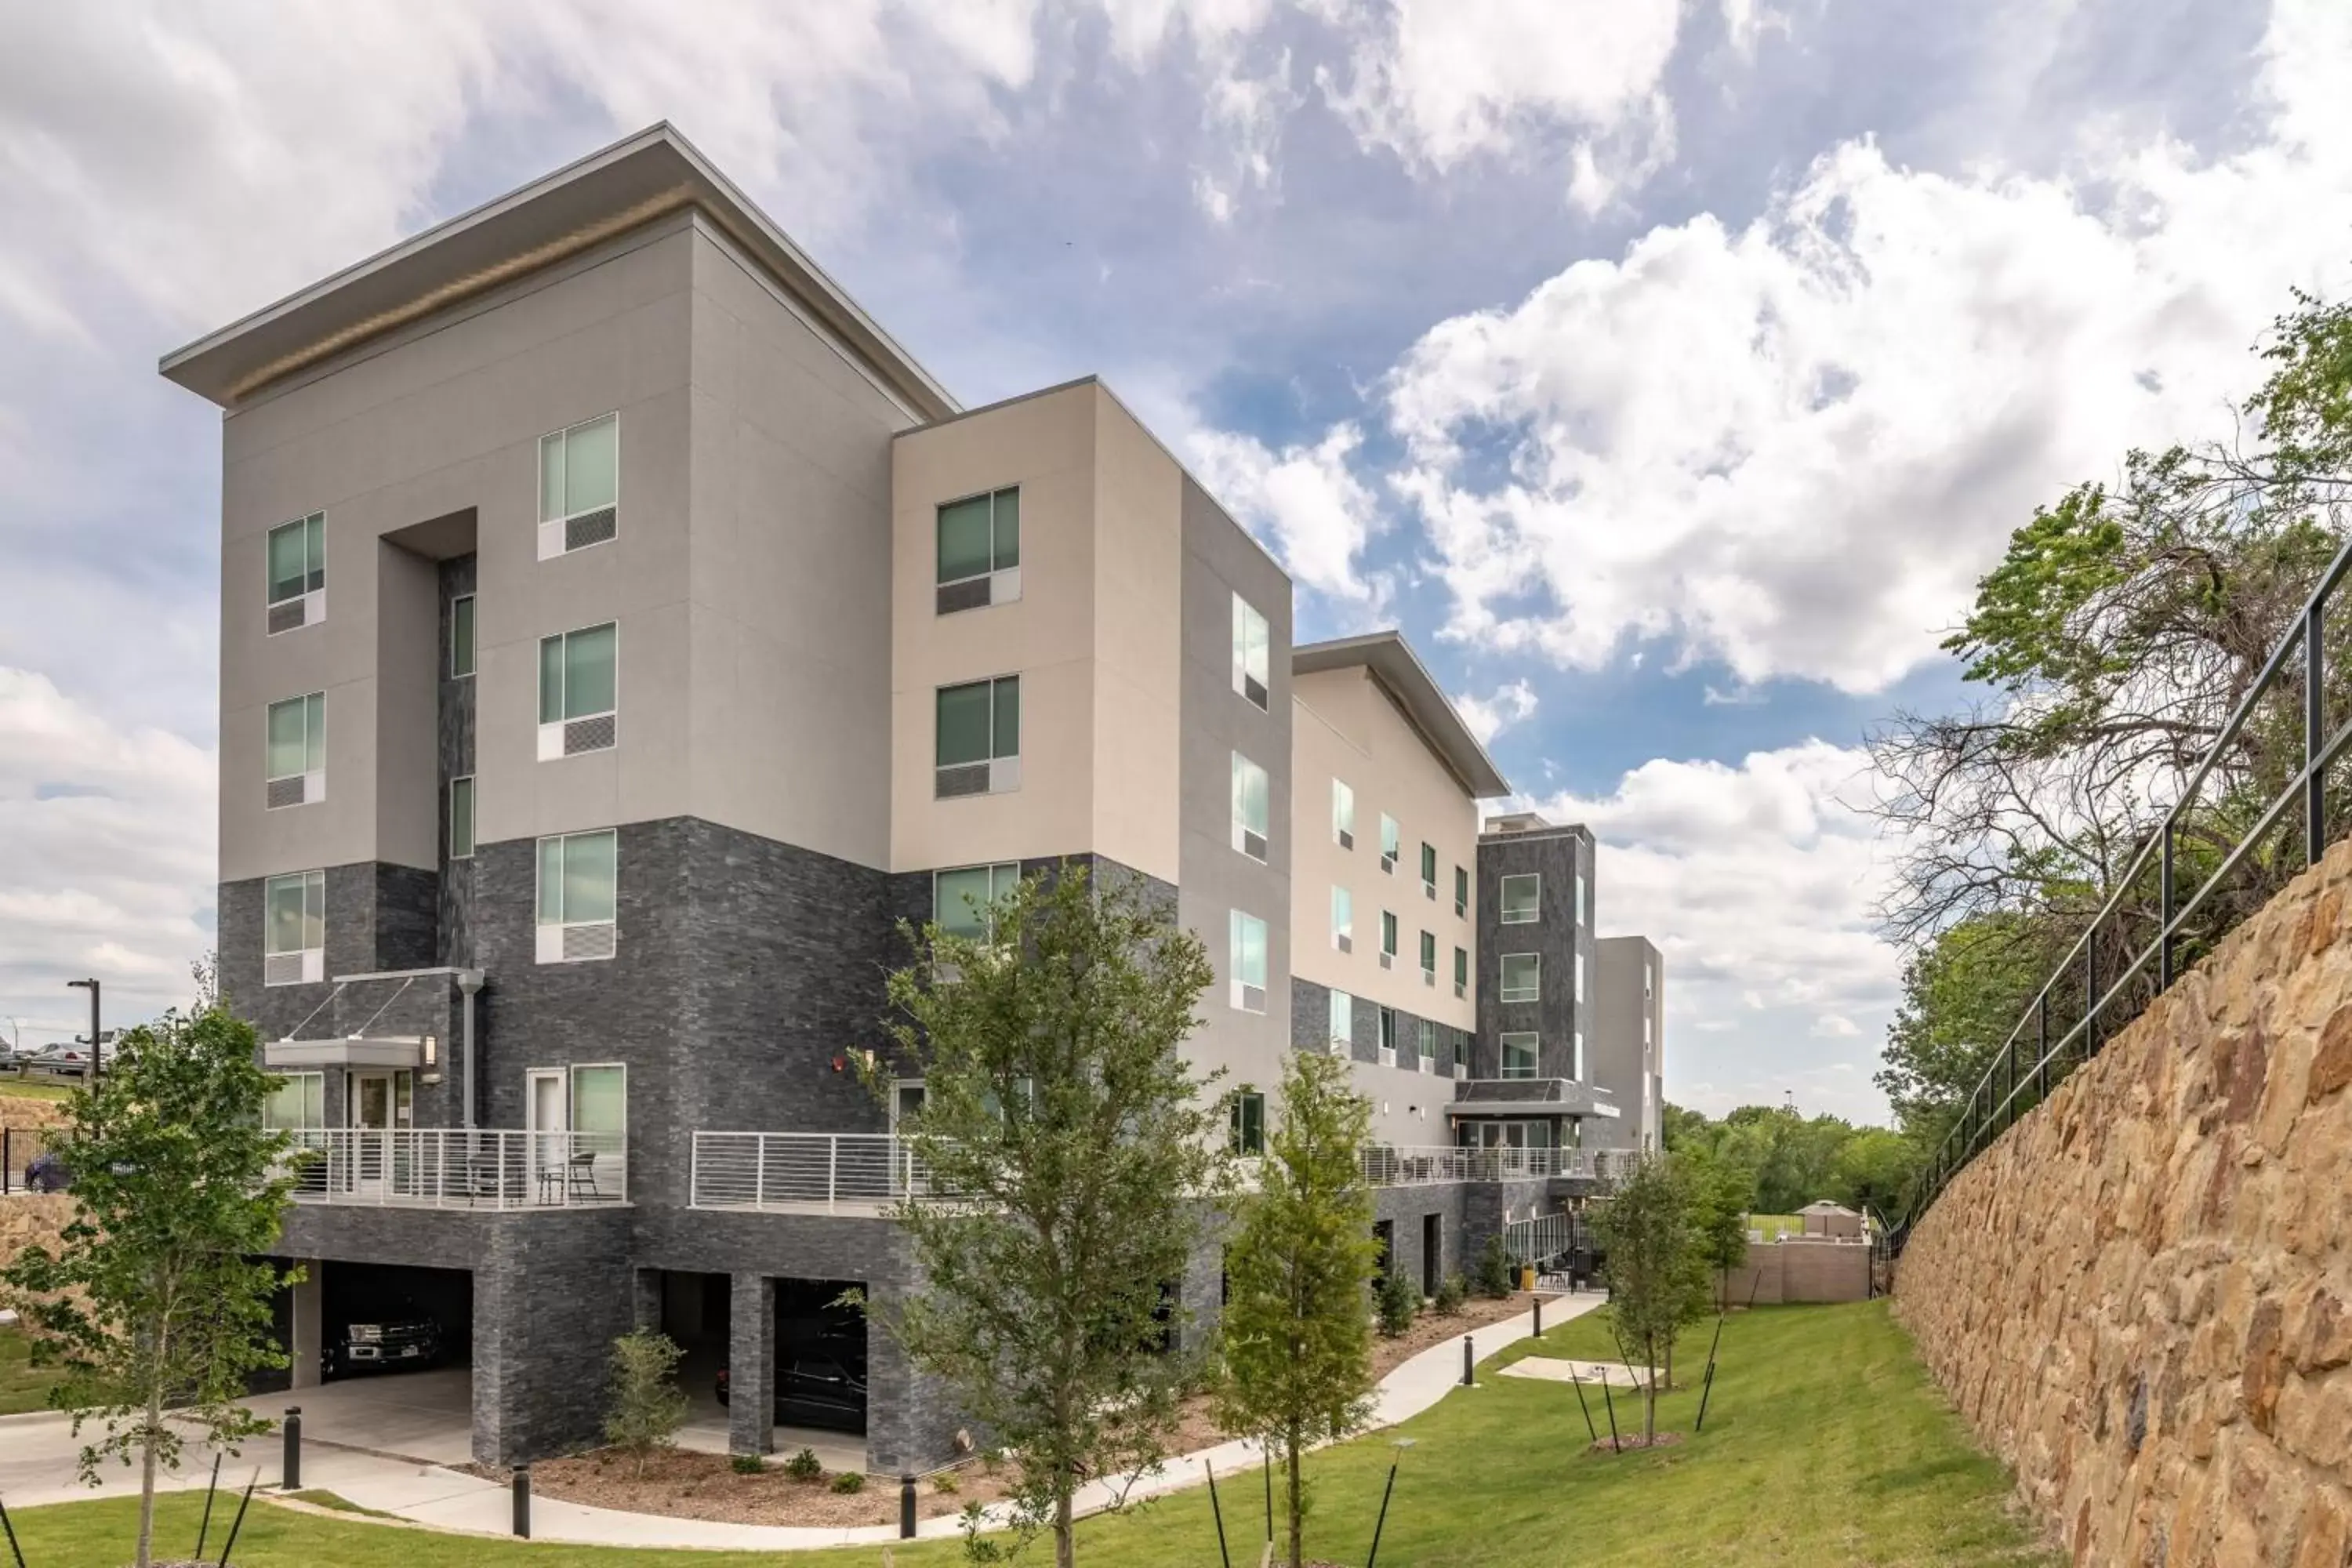 Property Building in TownePlace Suites by Marriott Dallas Rockwall